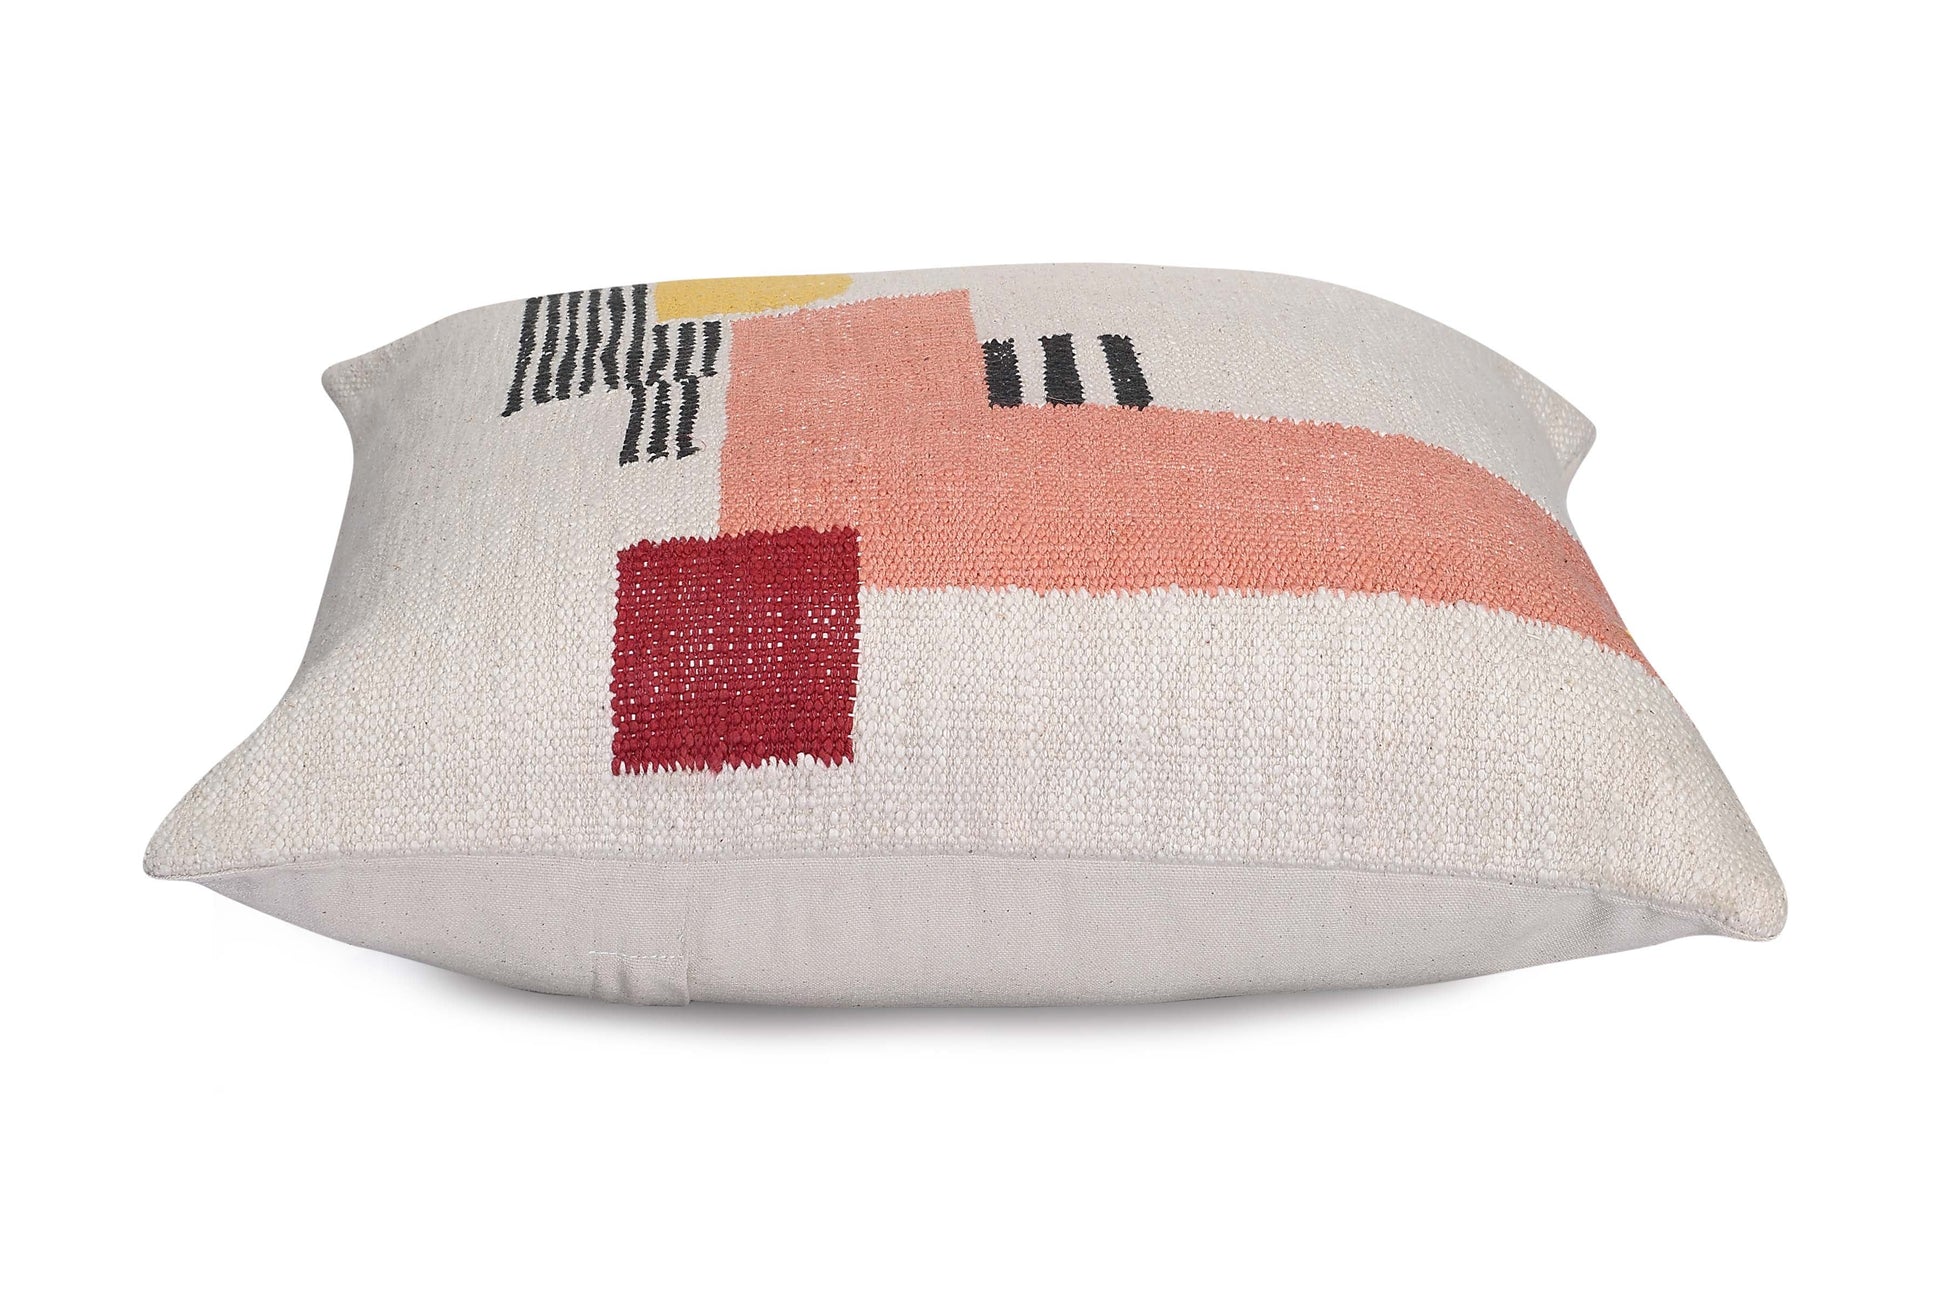 Rani Handwoven Patch Pillow, Pink - 18x18 Inch by The Artisen - Sumiye Co